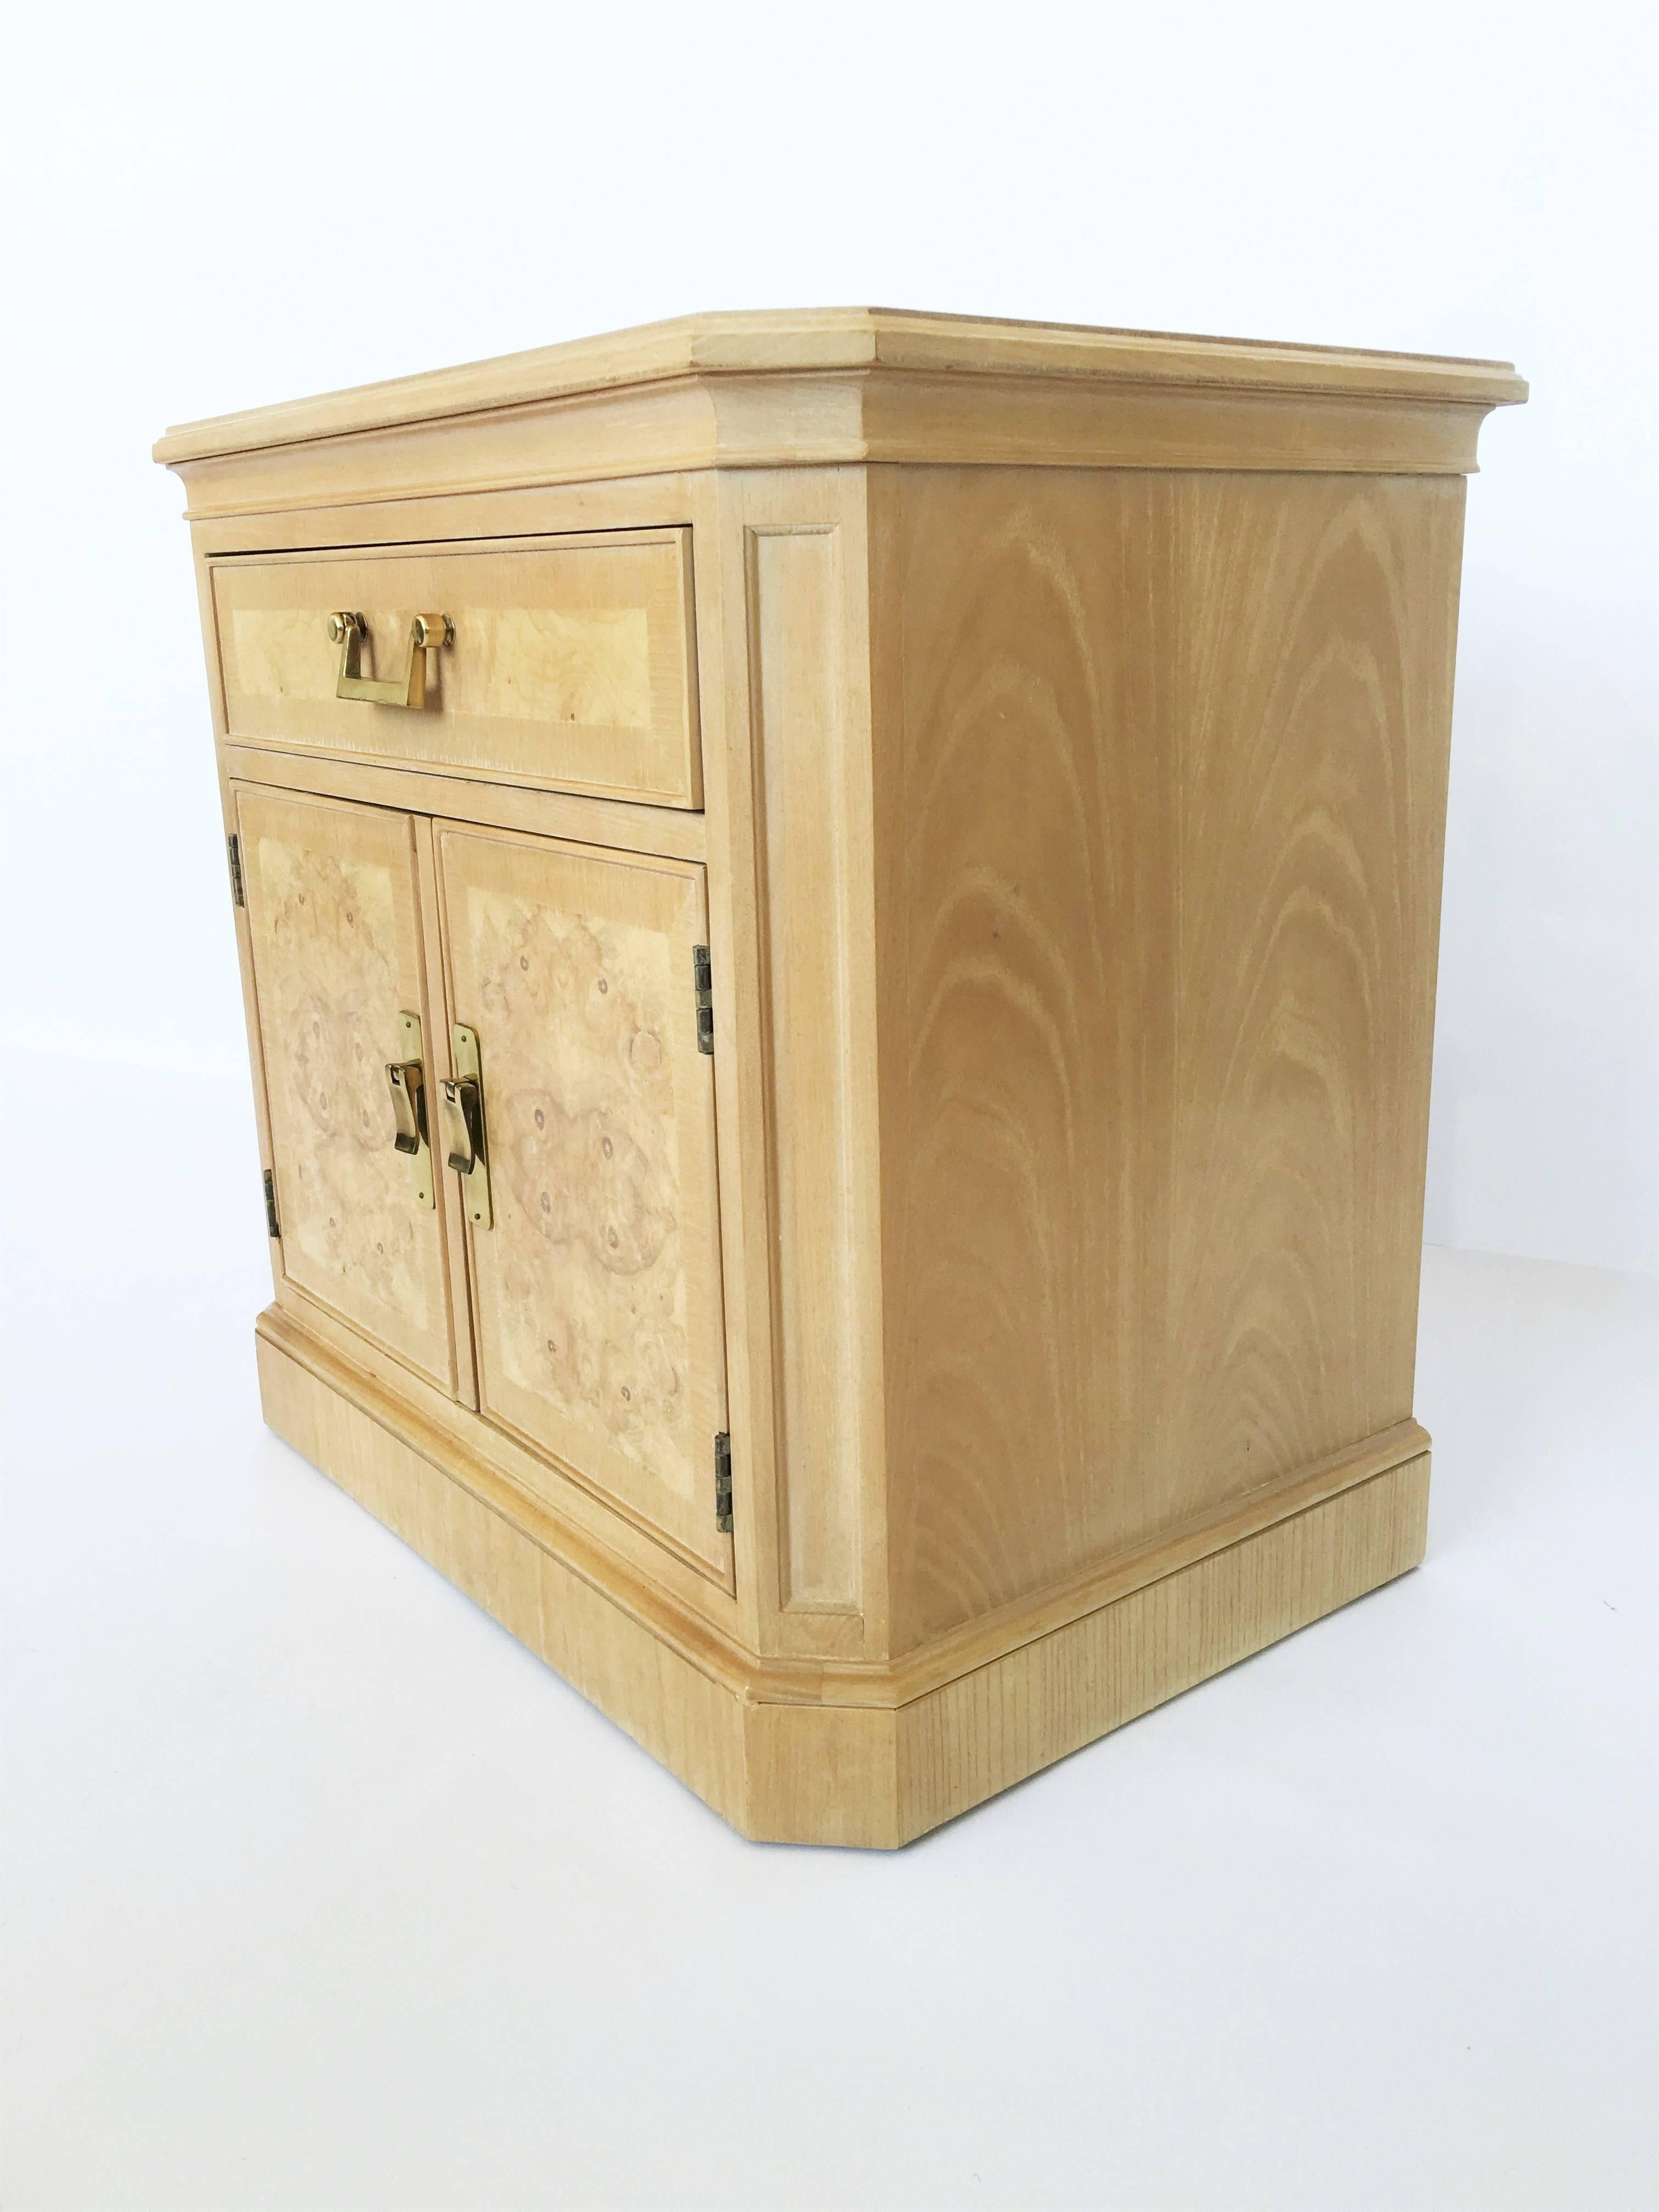 Absolutely stunning Drexel Heritage bedside cabinets in burl ashwood. These are part of the Corinthian Collection, features one pull-out drawer on the top and a double door cabinet area providing ample storage and organization options. The ashwood